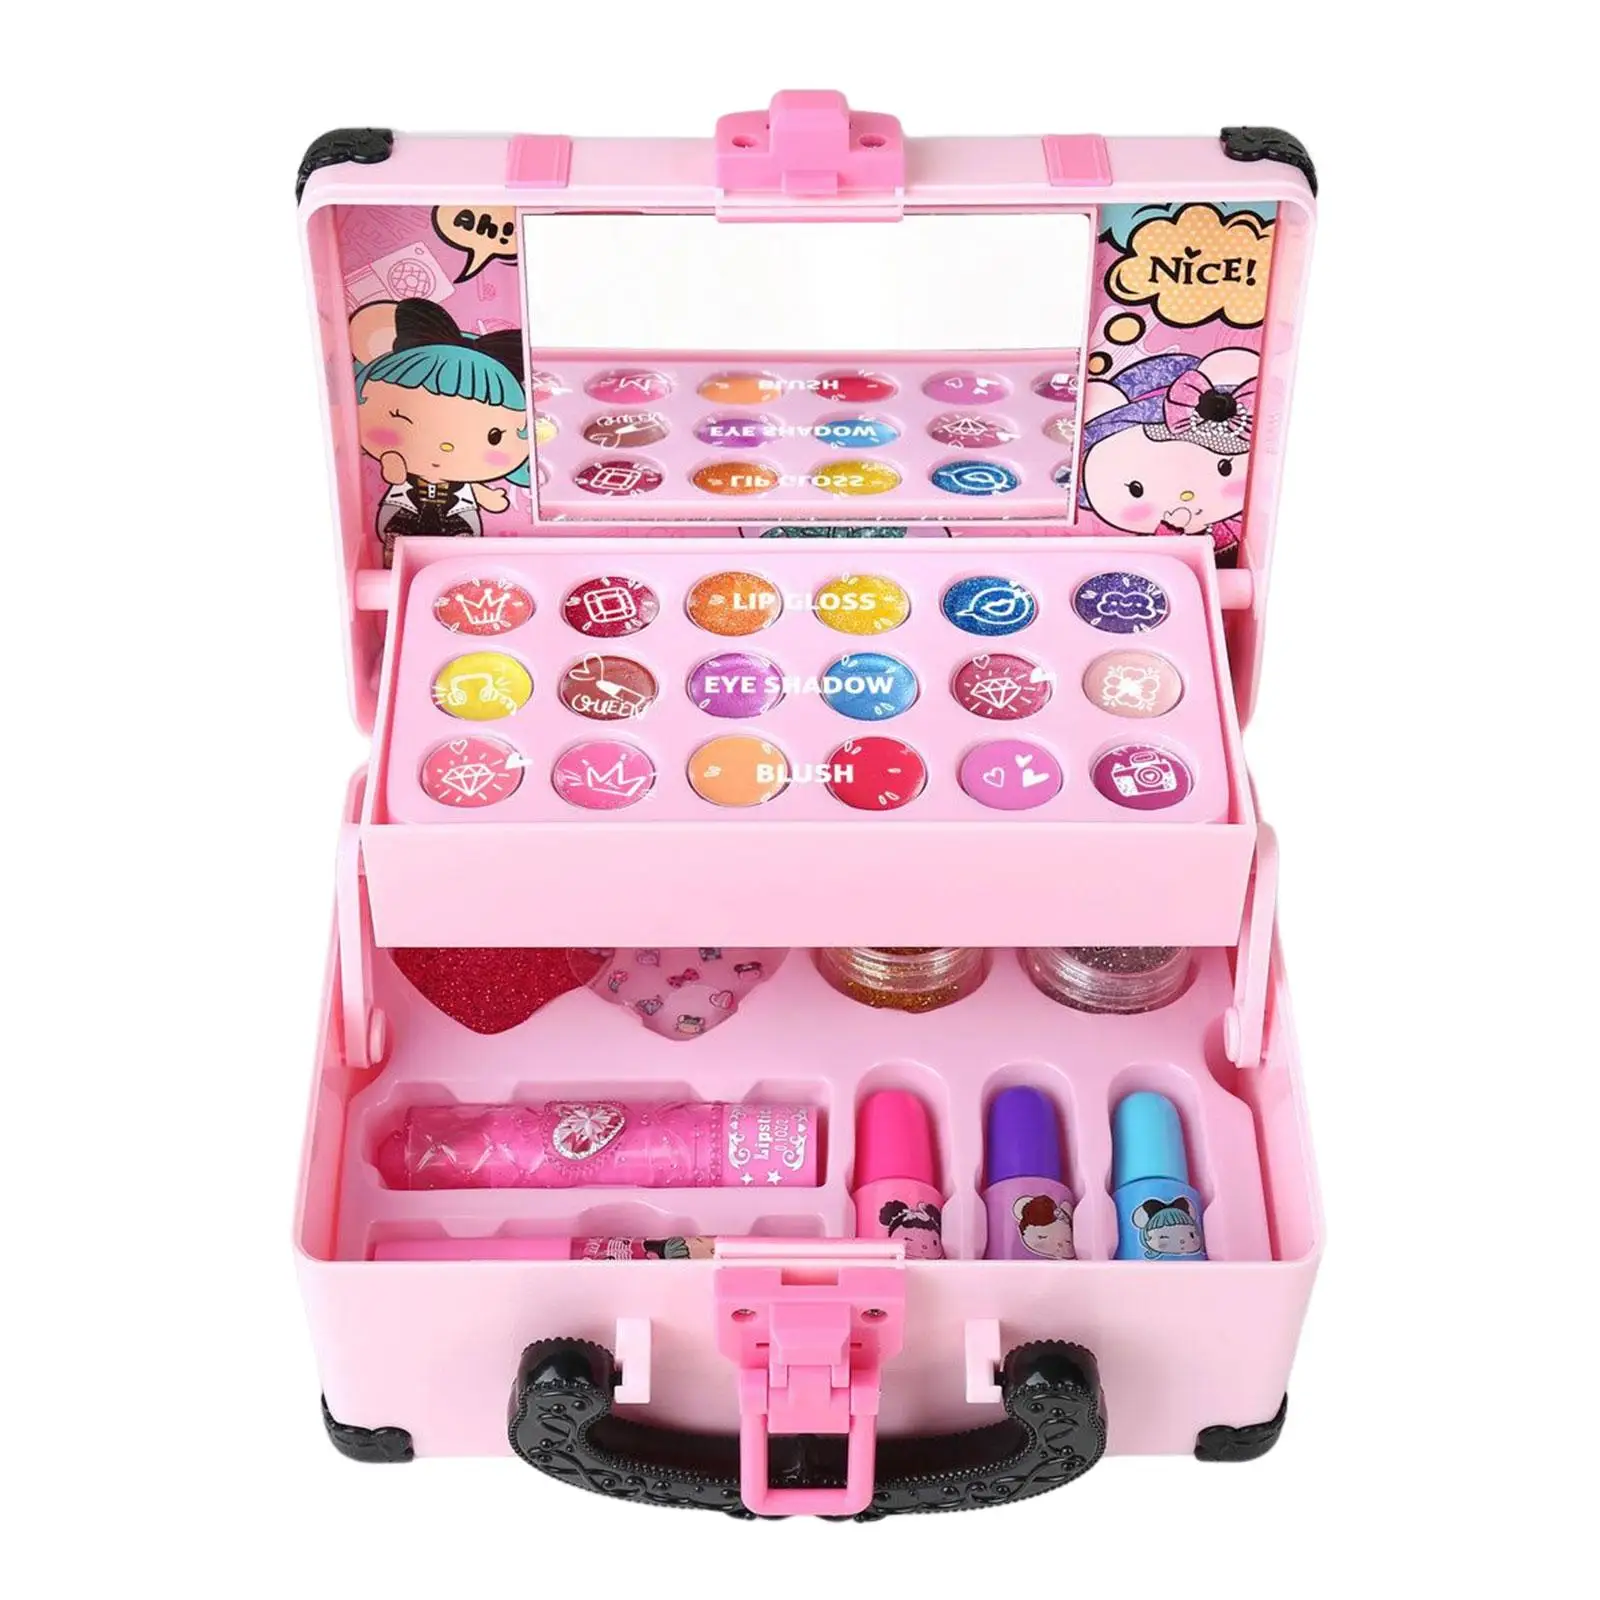 Cosmetics Makeup Toy Set Dresser Toy Pretend Makeup Accessories Pretend Makeup Set for Children Toddlers Girls Birthday Gifts